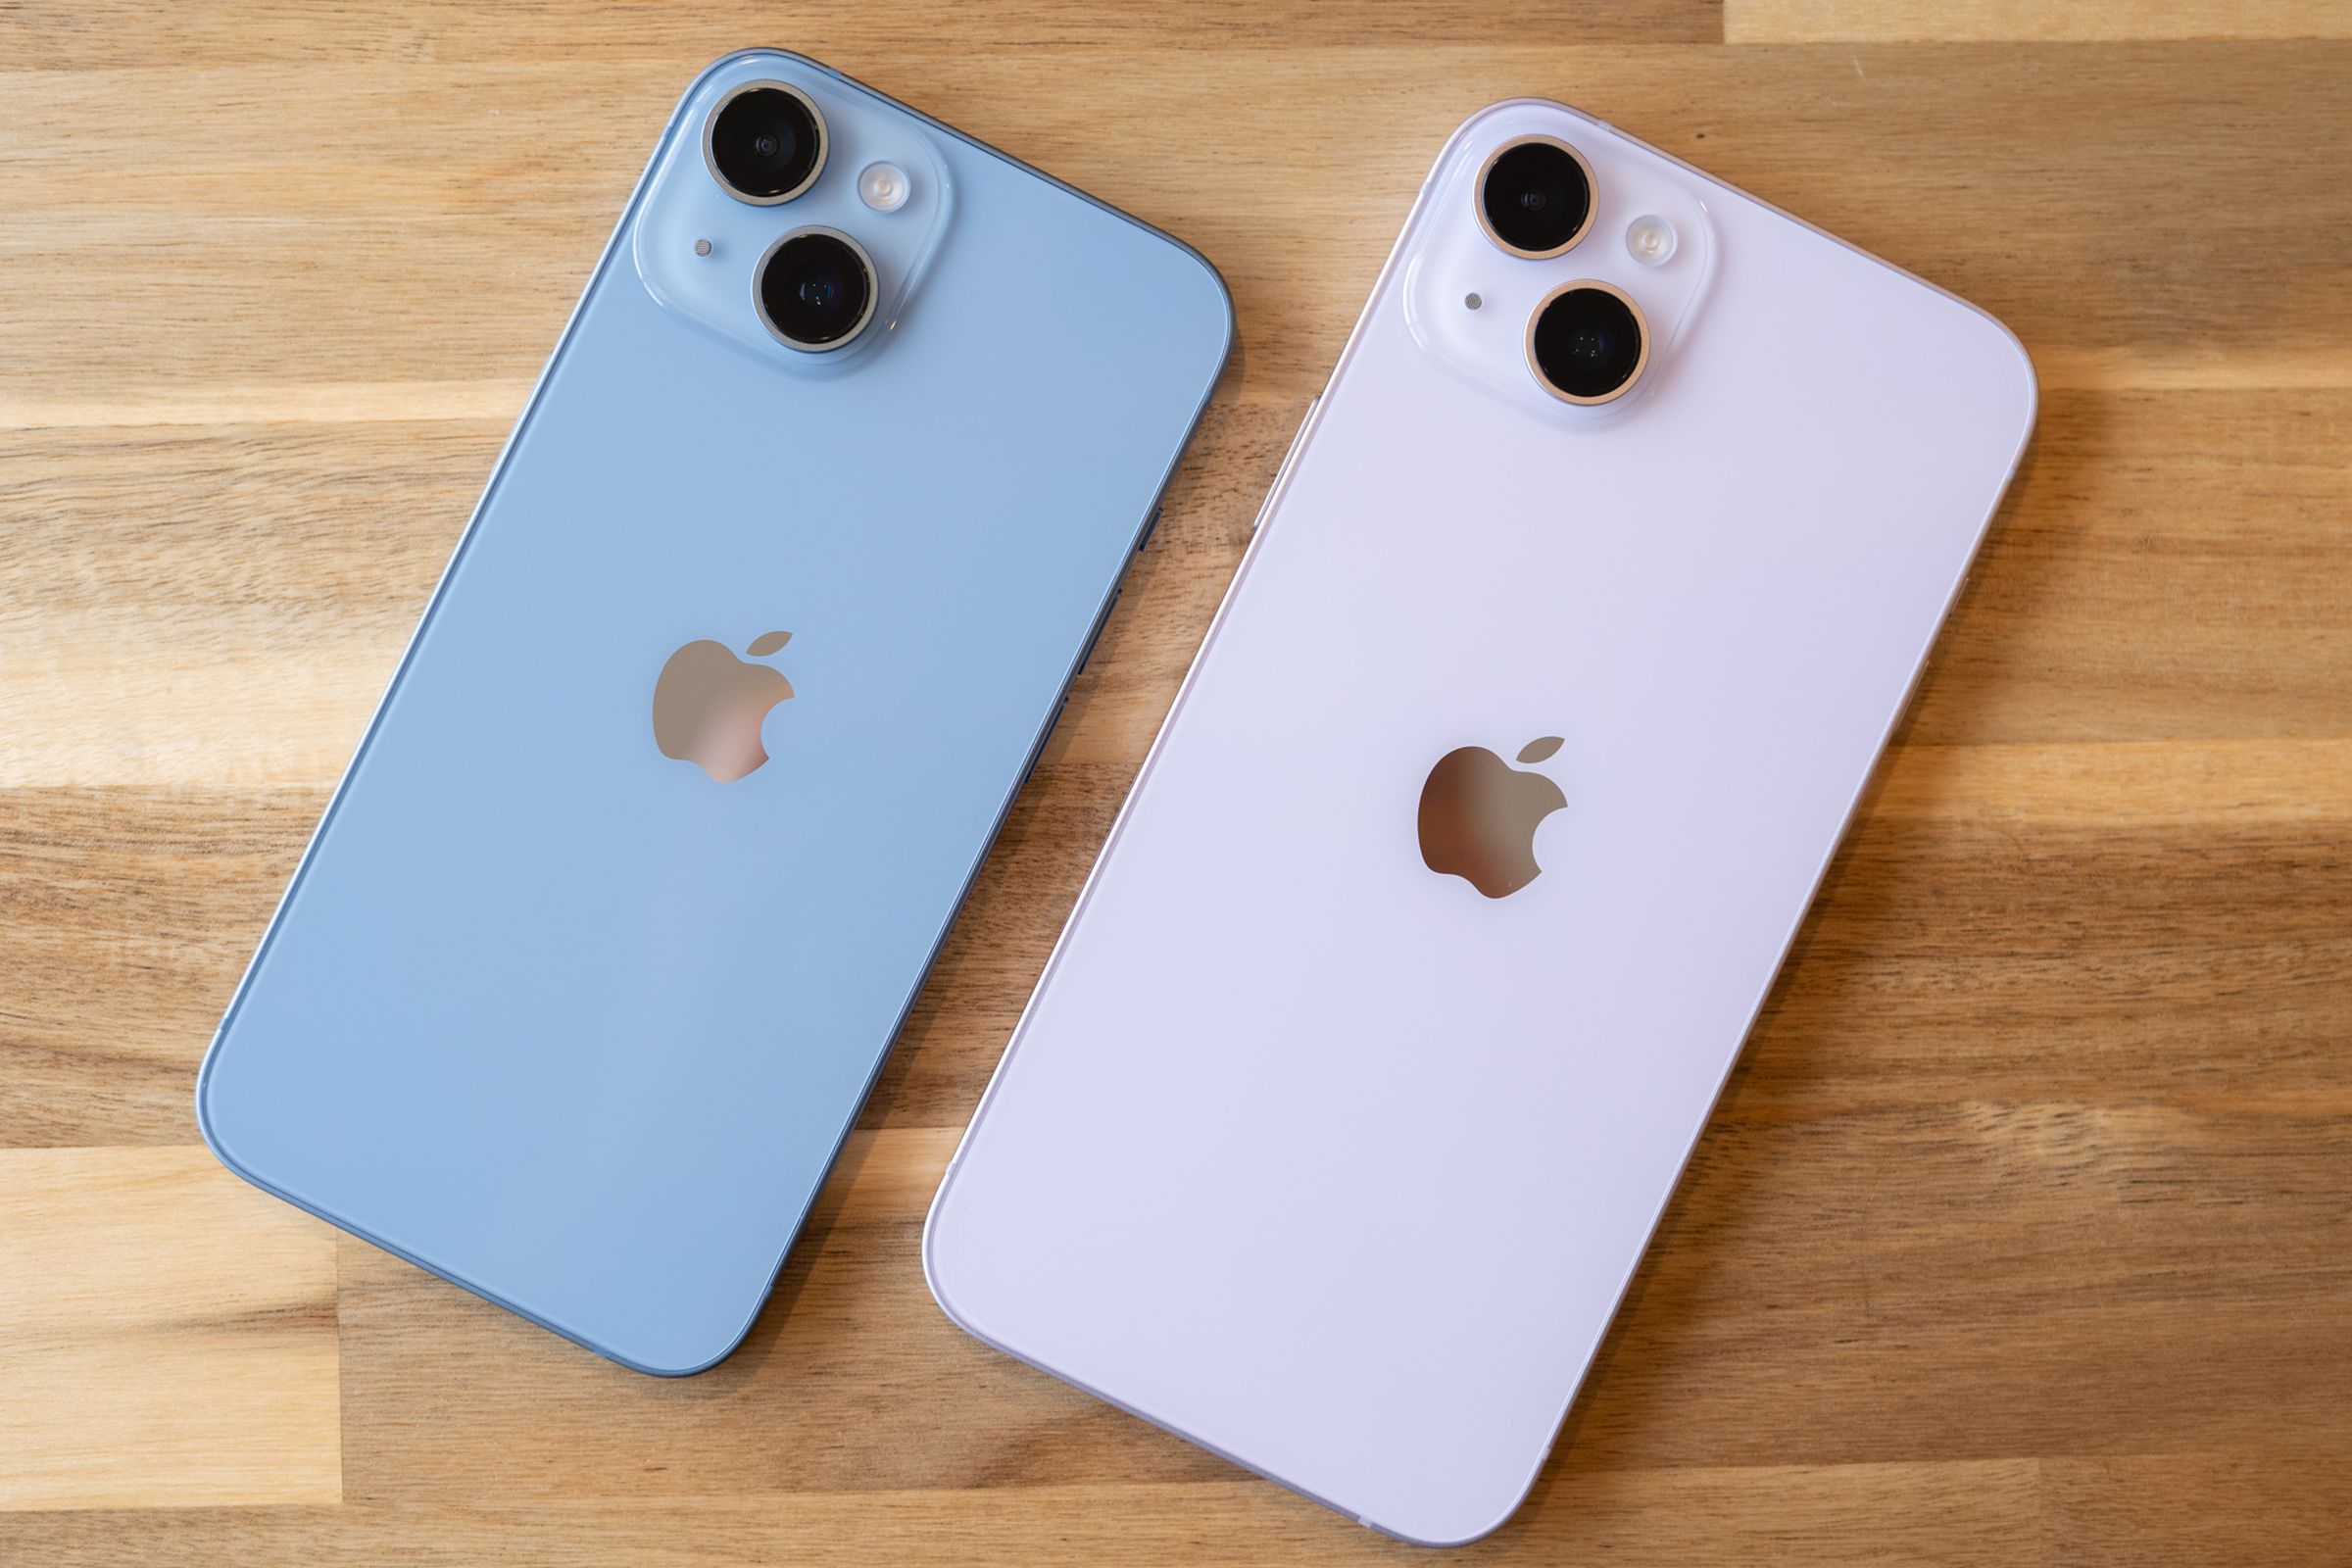 The iPhone 14 (left) and iPhone 14 Plus (right) both include a capable A15 Bionic processor.